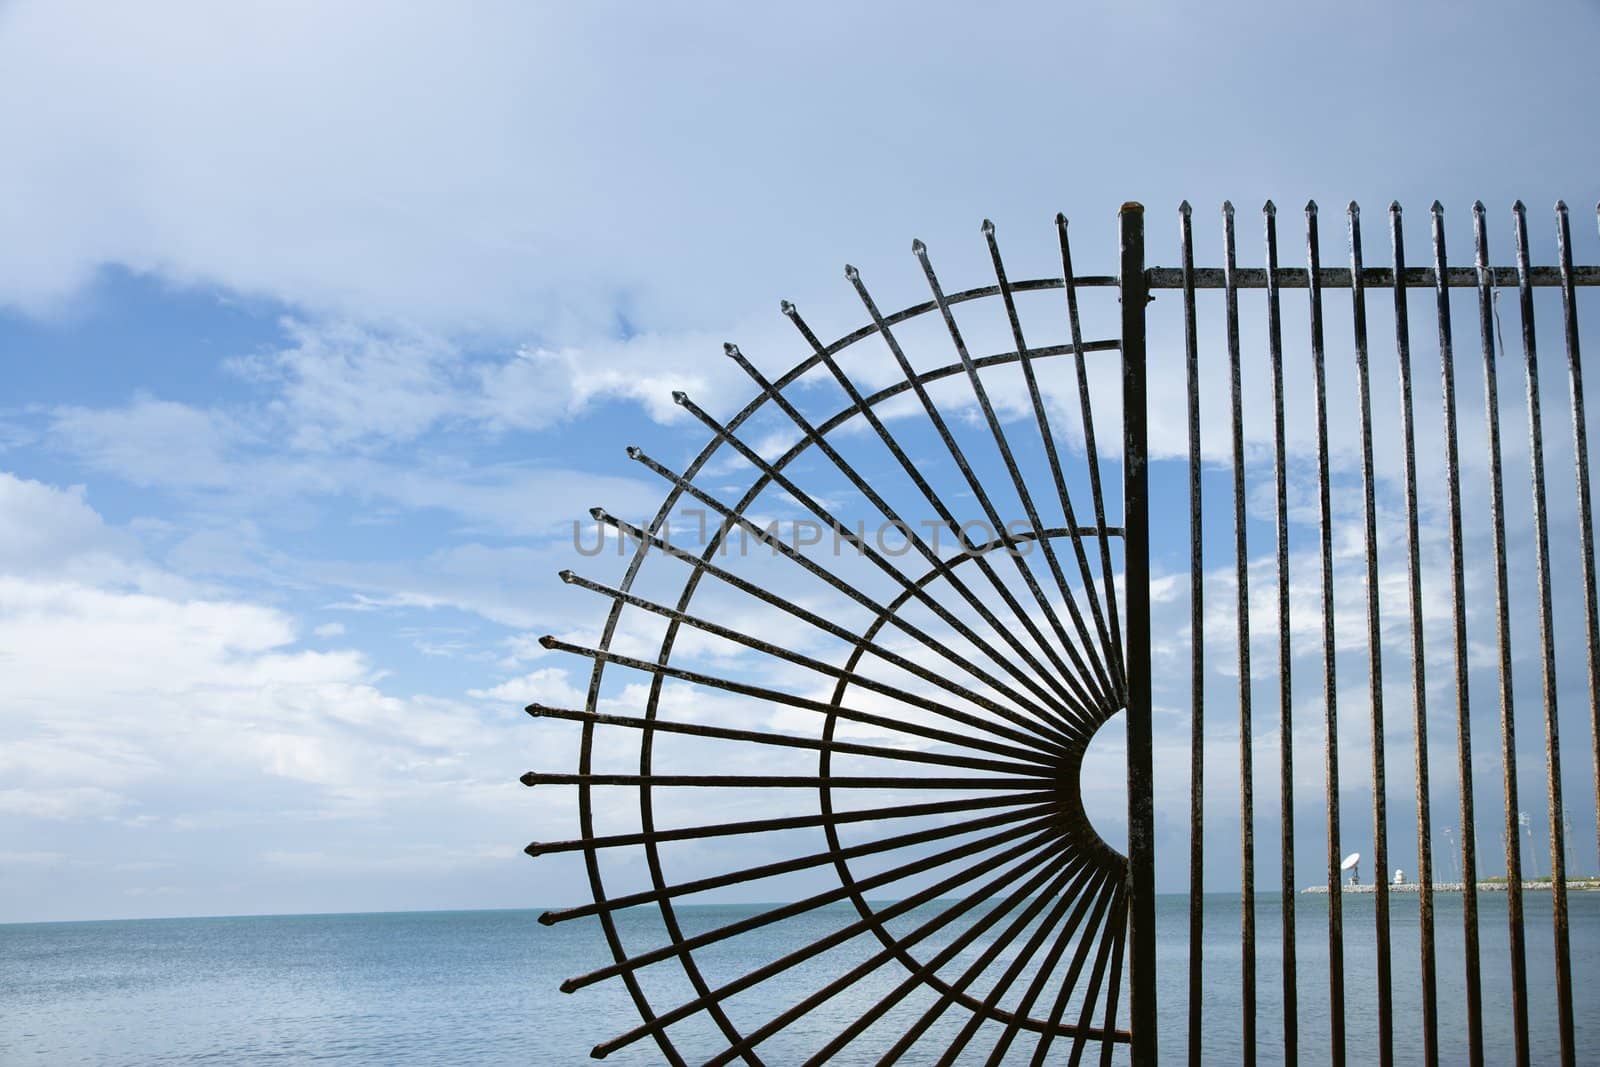 Decorative wrought iron fence at the edge of the sea.